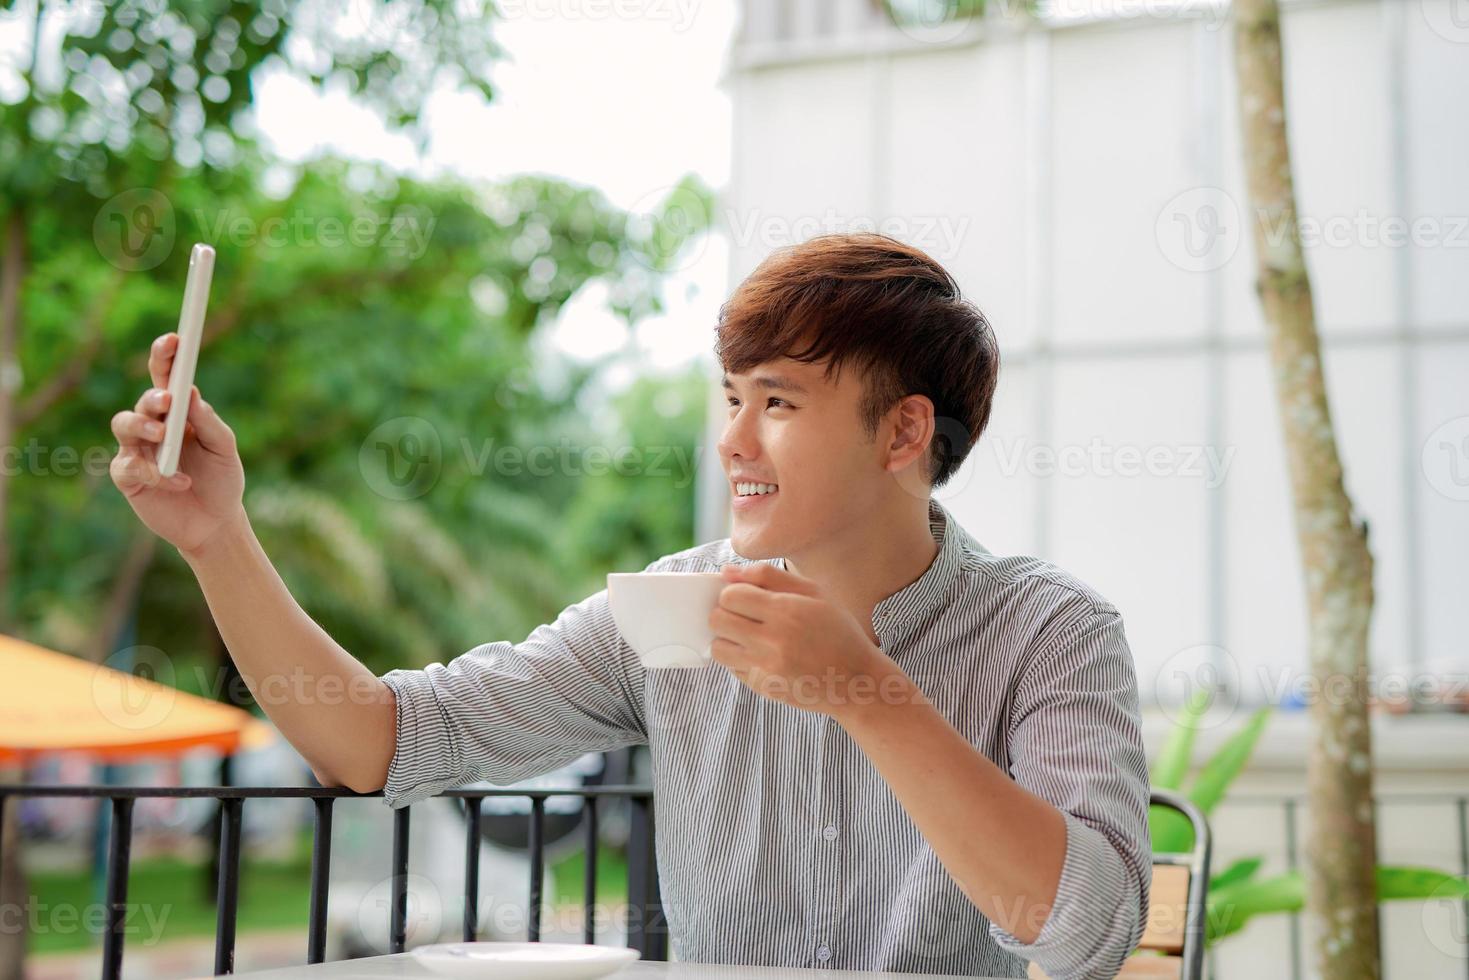 young man spending time in outdoor restaurant having a coffee and taking selfie photo